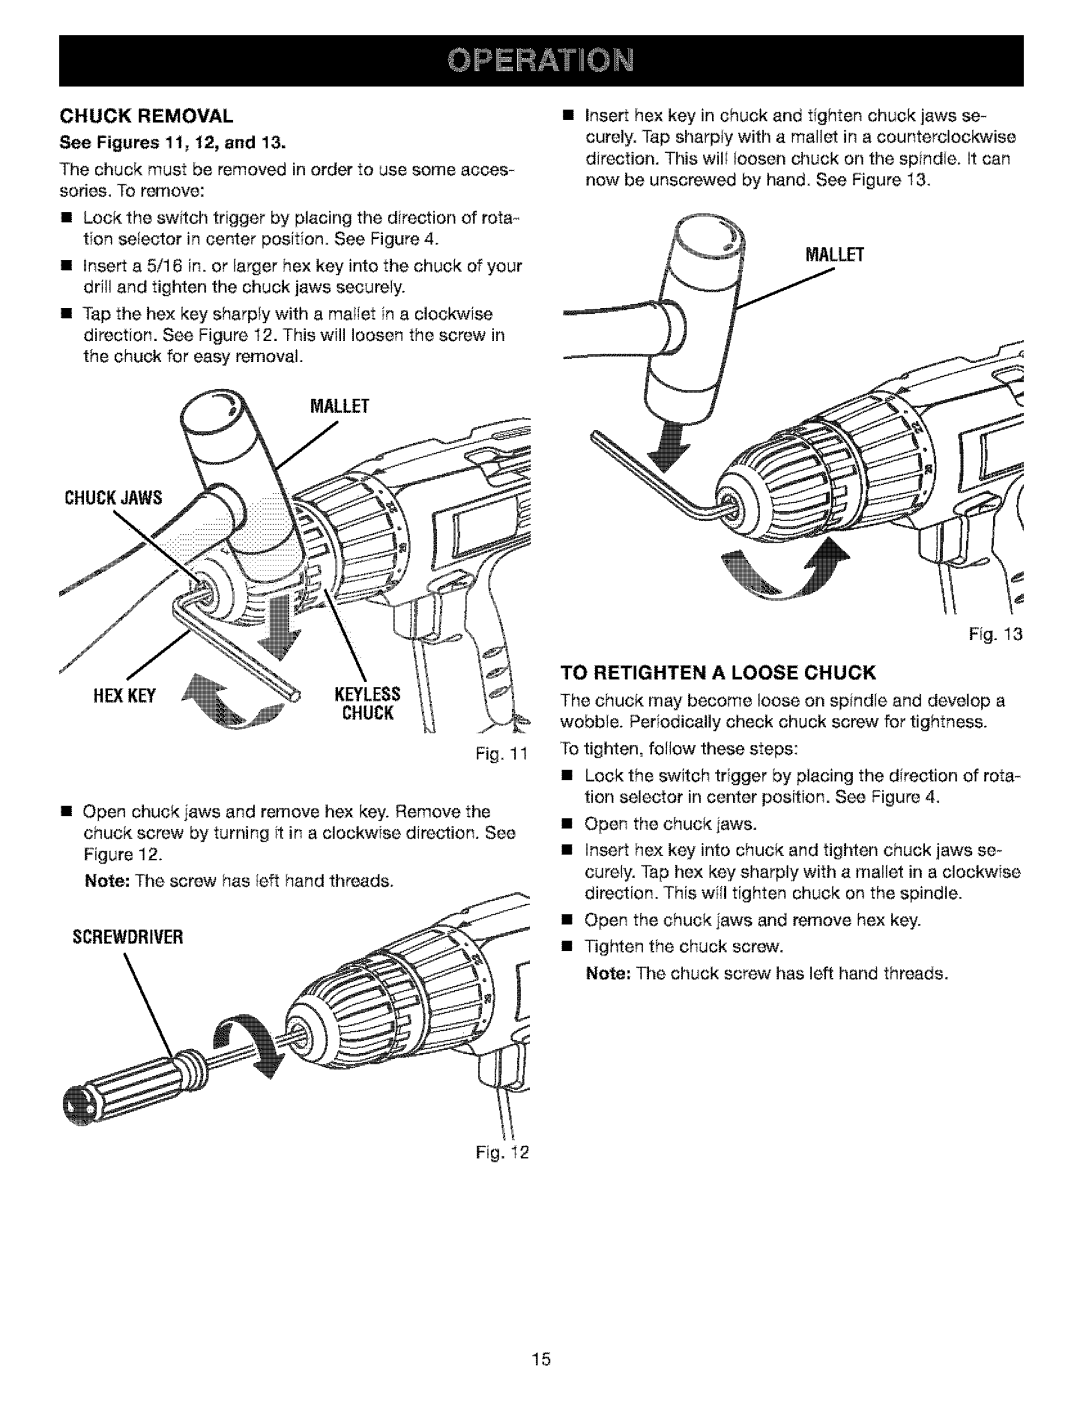 Craftsman 315.11521 manual Chuck Removal, See Figures 11, 12, and, Mallet, Chuckjaws, Hexkeykeyless Chuck, Screwdriver 